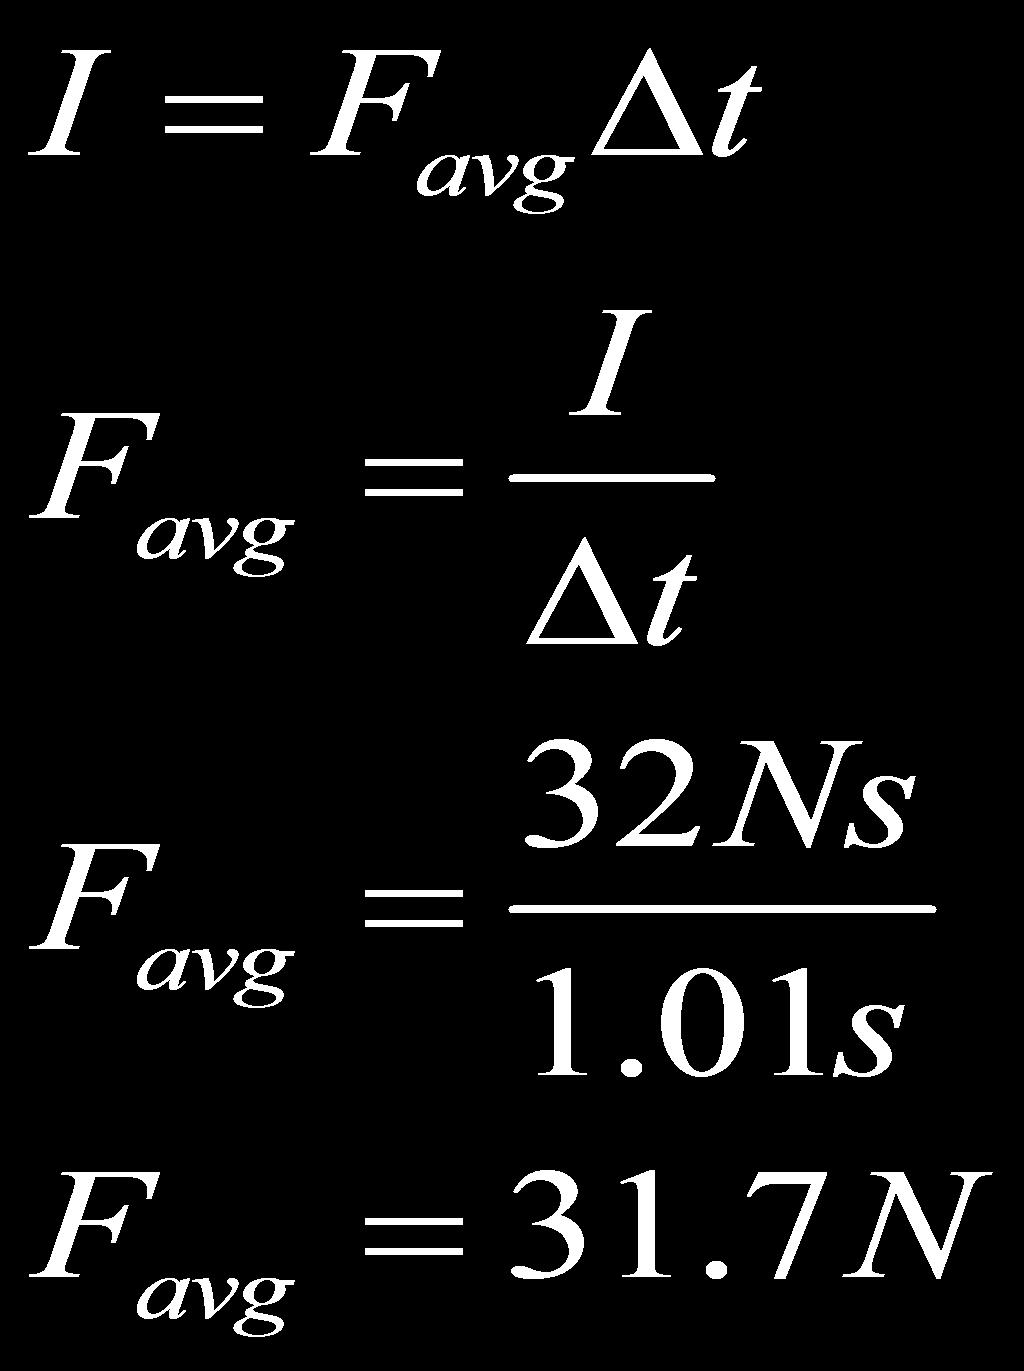 14 A force described by F(t) = 190t 189t 2 is applied by a bat to a 0.145 kg ball.